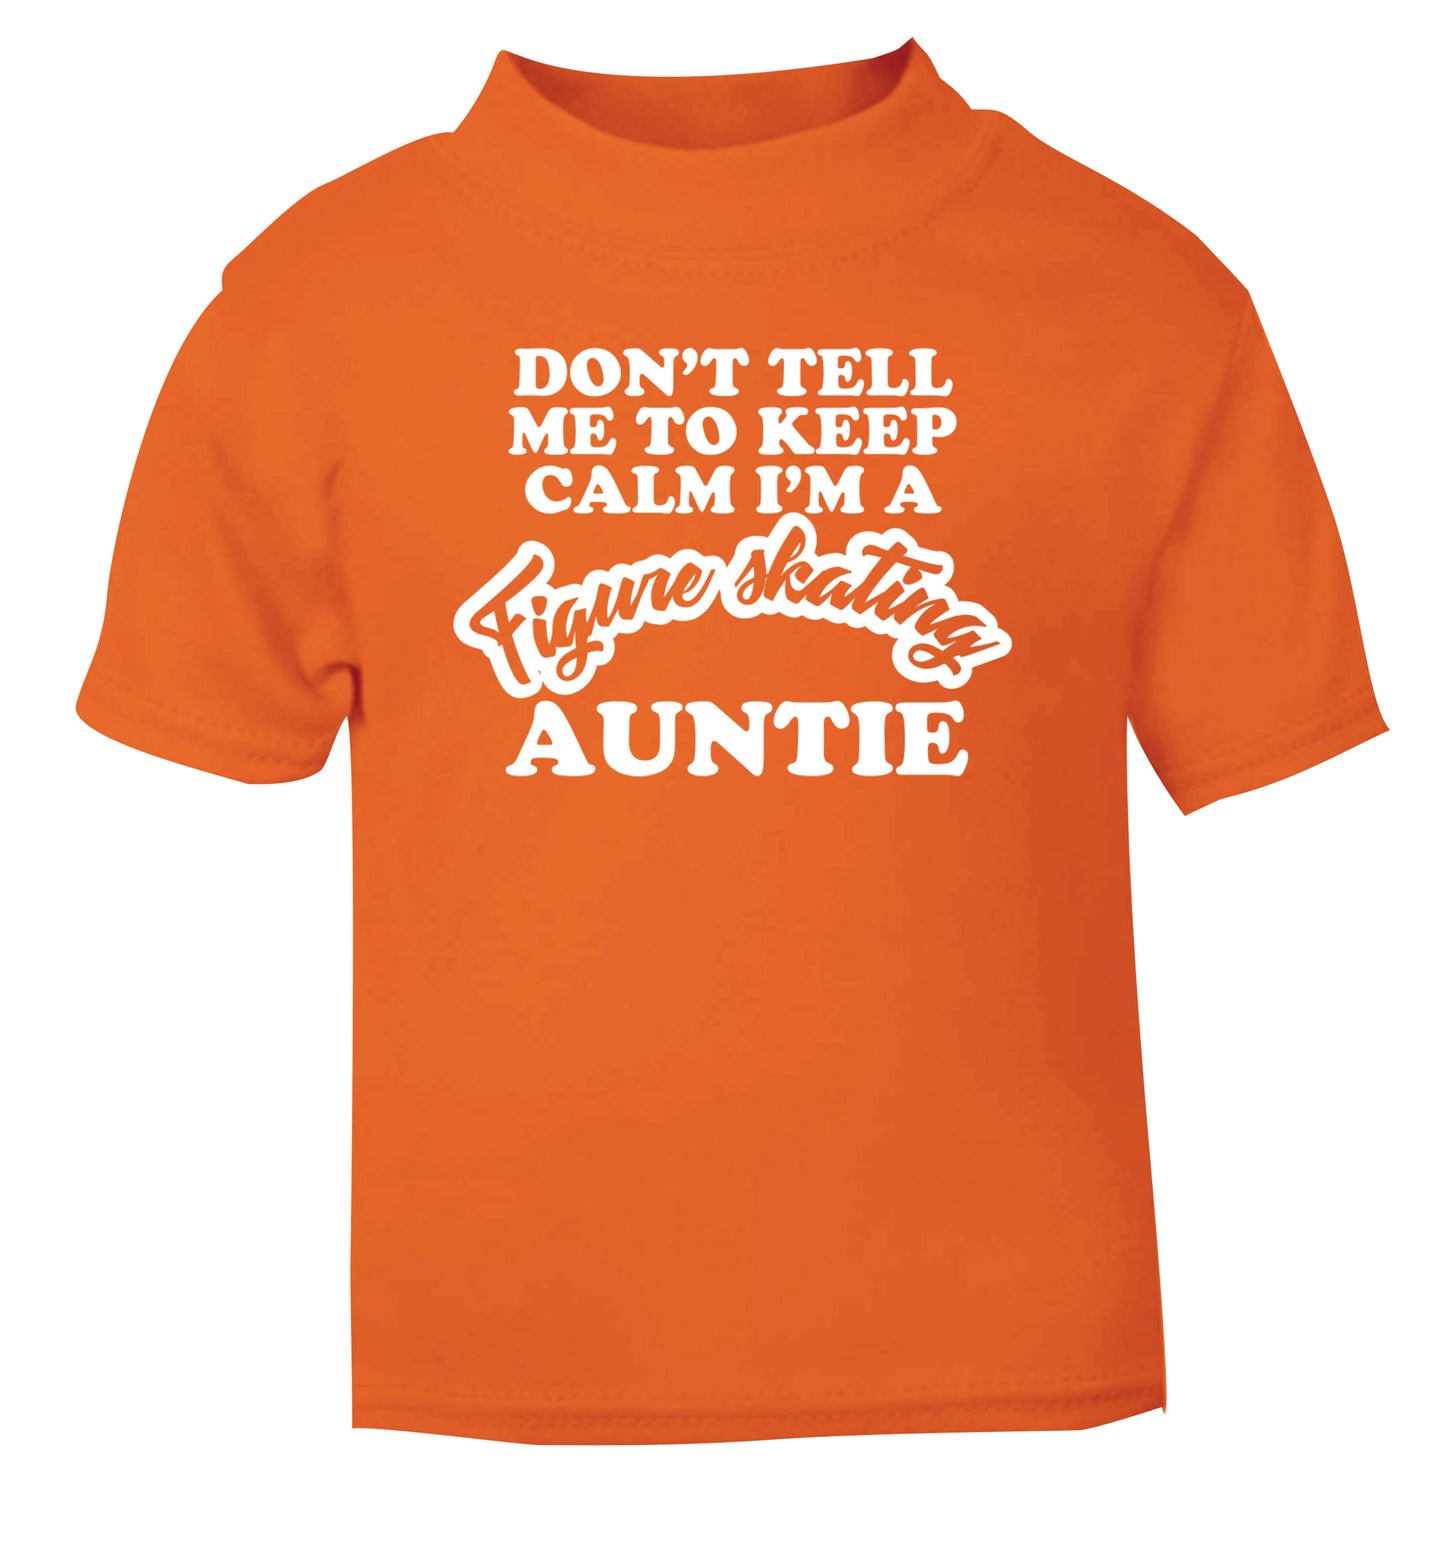 Don't tell me to keep calm I'm a figure skating auntie orange Baby Toddler Tshirt 2 Years